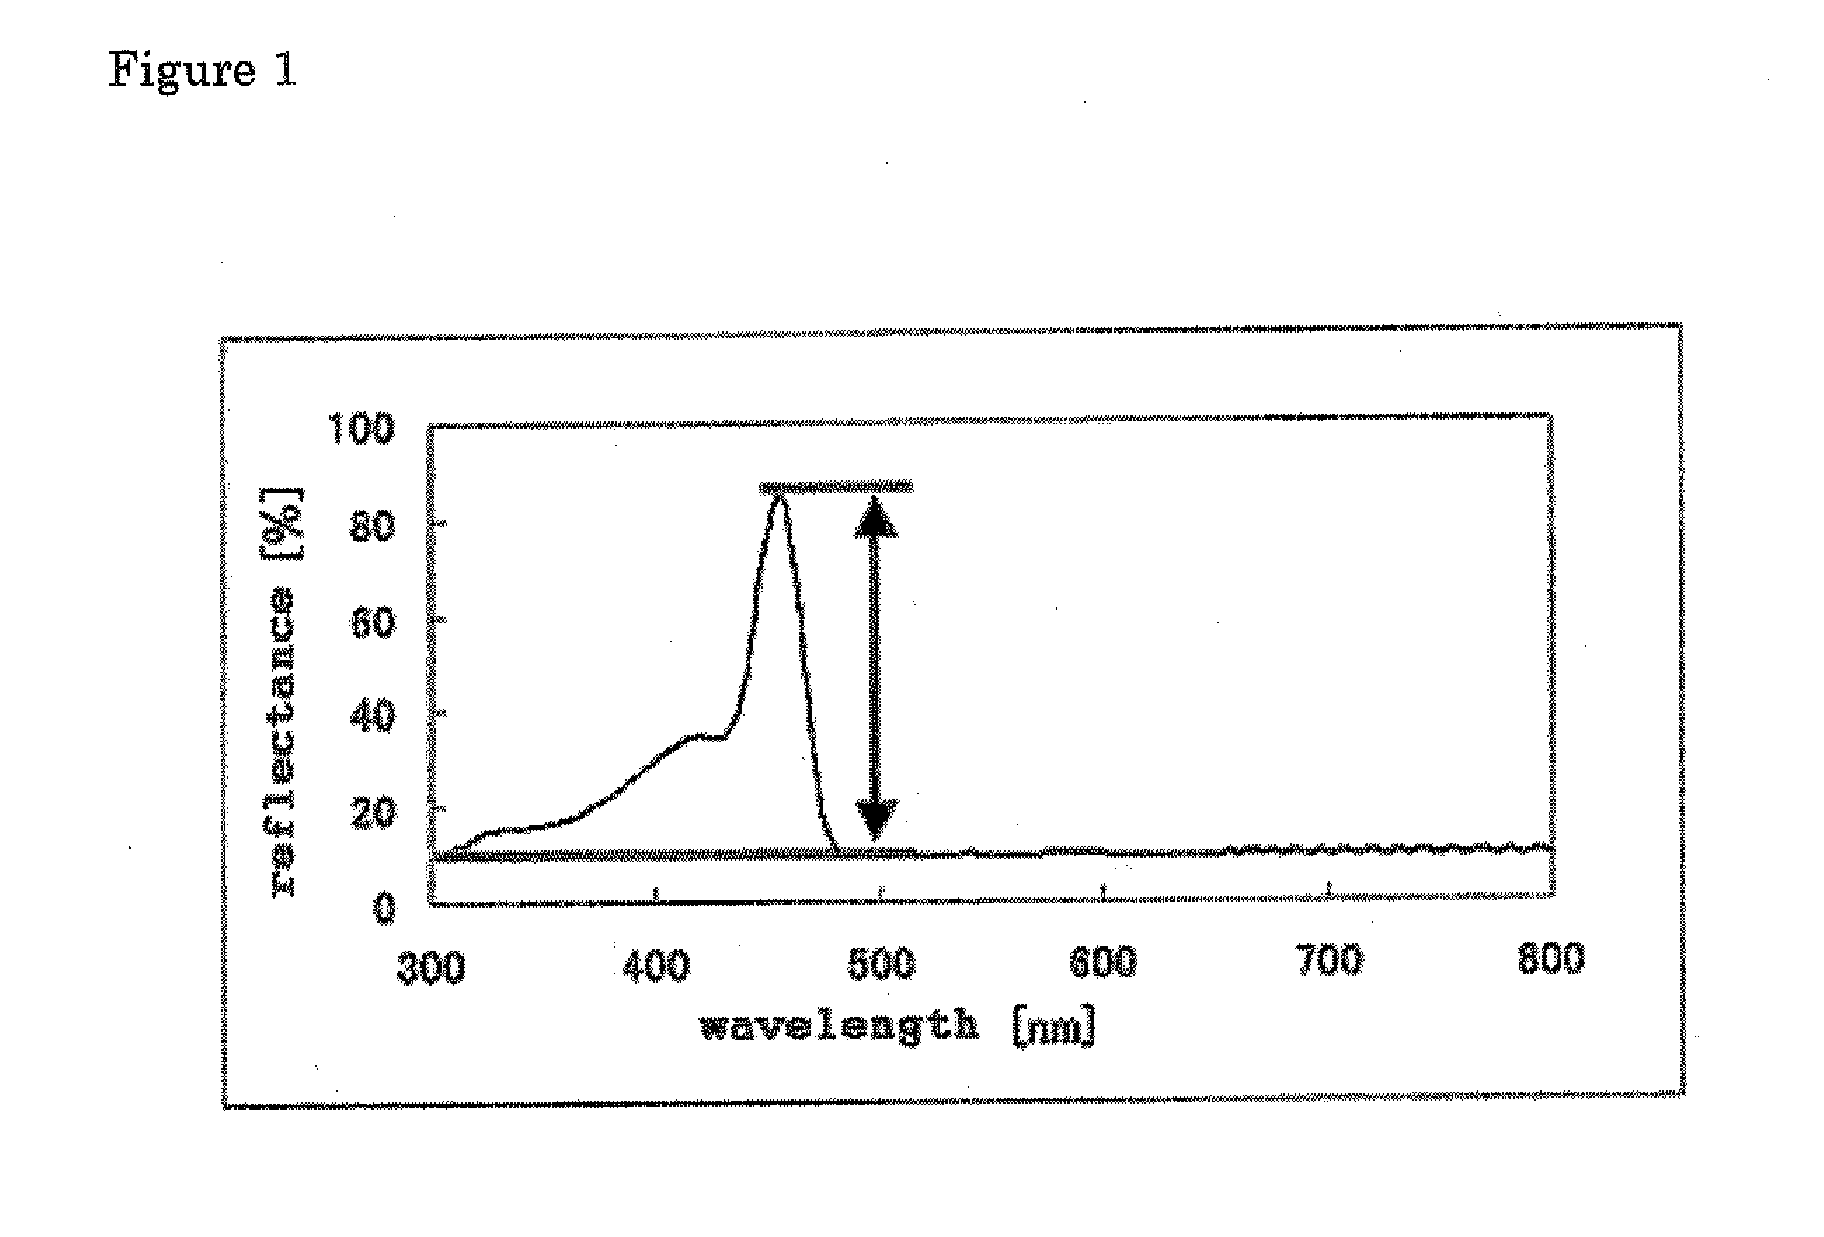 Biaxially drawn multilayer laminated film and method for producing the same